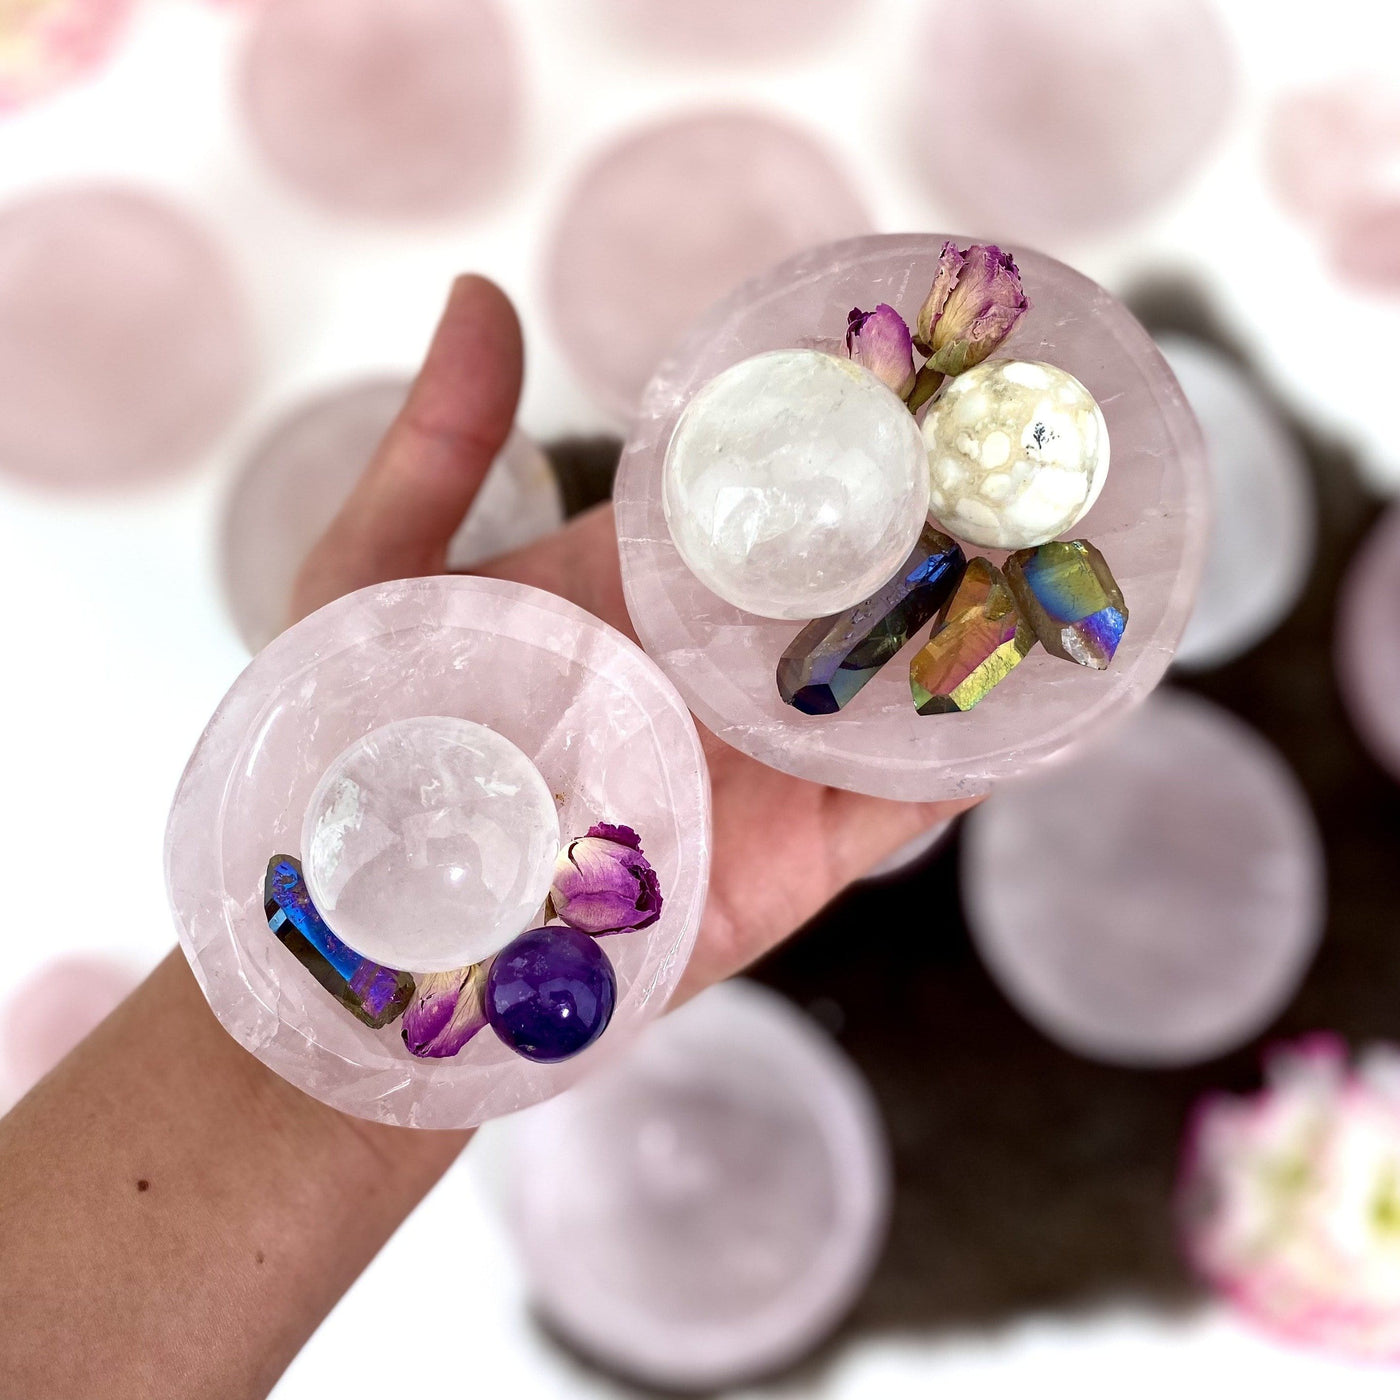 Hand holding up 2 Rose Quartz Stone Round Dishes with crystals inside with others blurred in the background